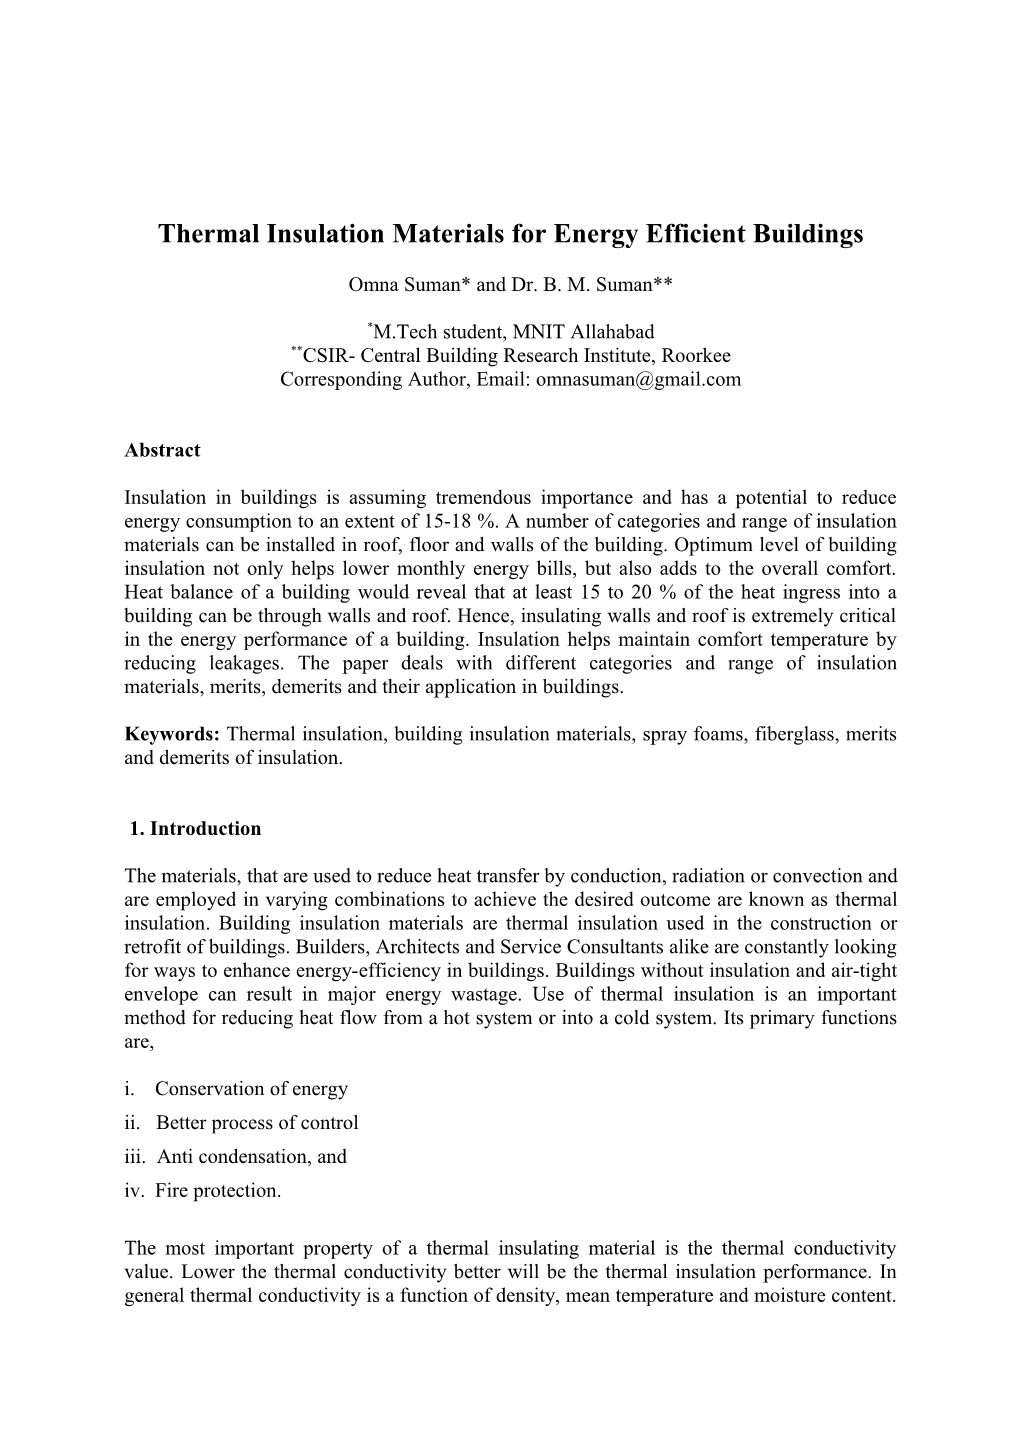 Thermal Insulation Materials for Energy Efficient Buildings